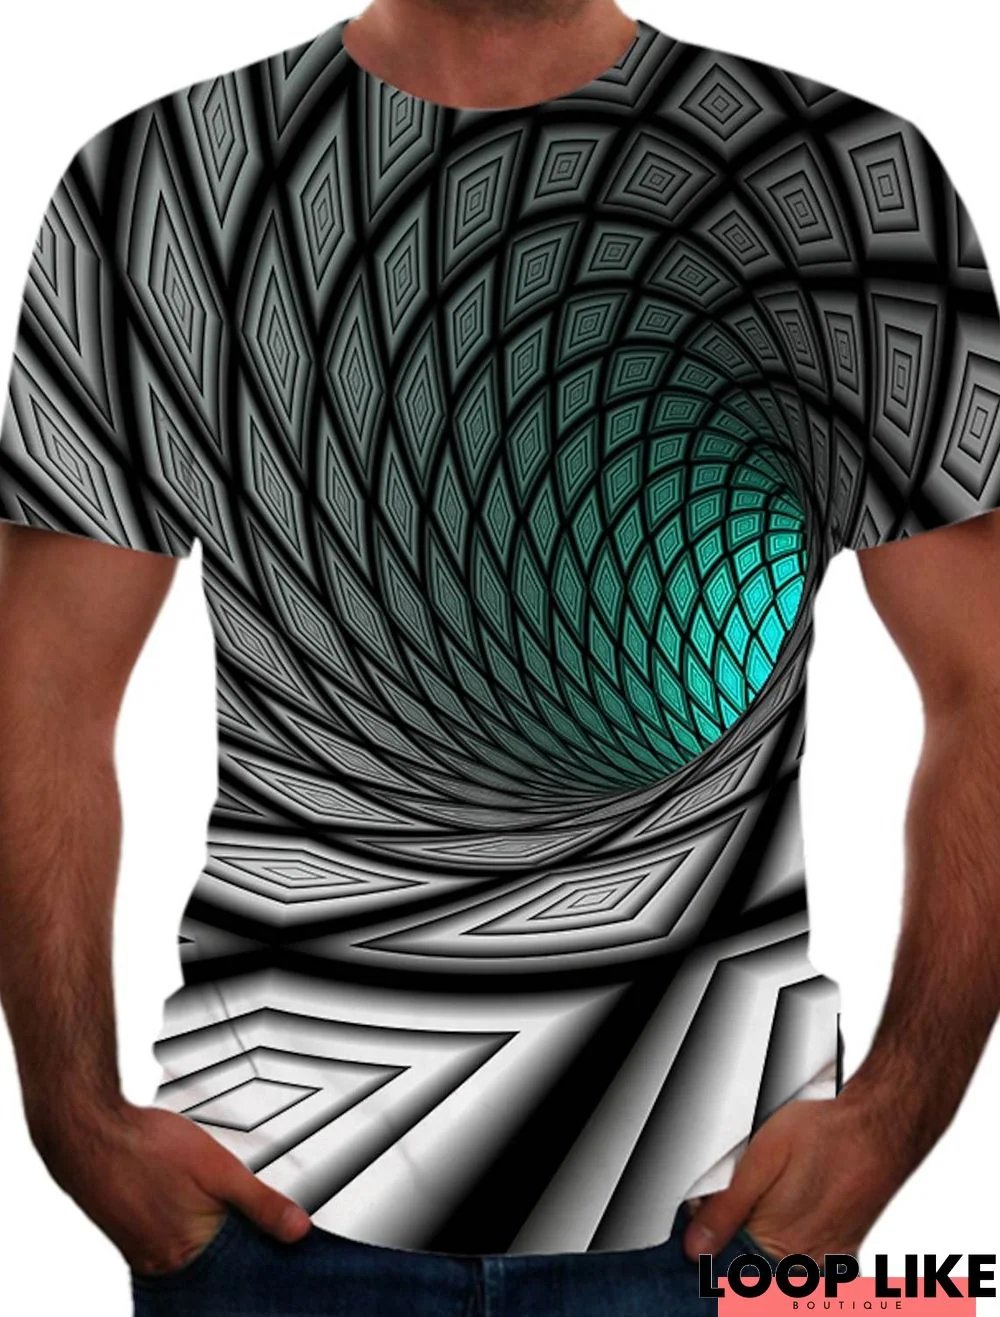 Men's Tee T Shirt 3D Print Graphic Optical Illusion Plus Size Short Sleeve Athletic Tops